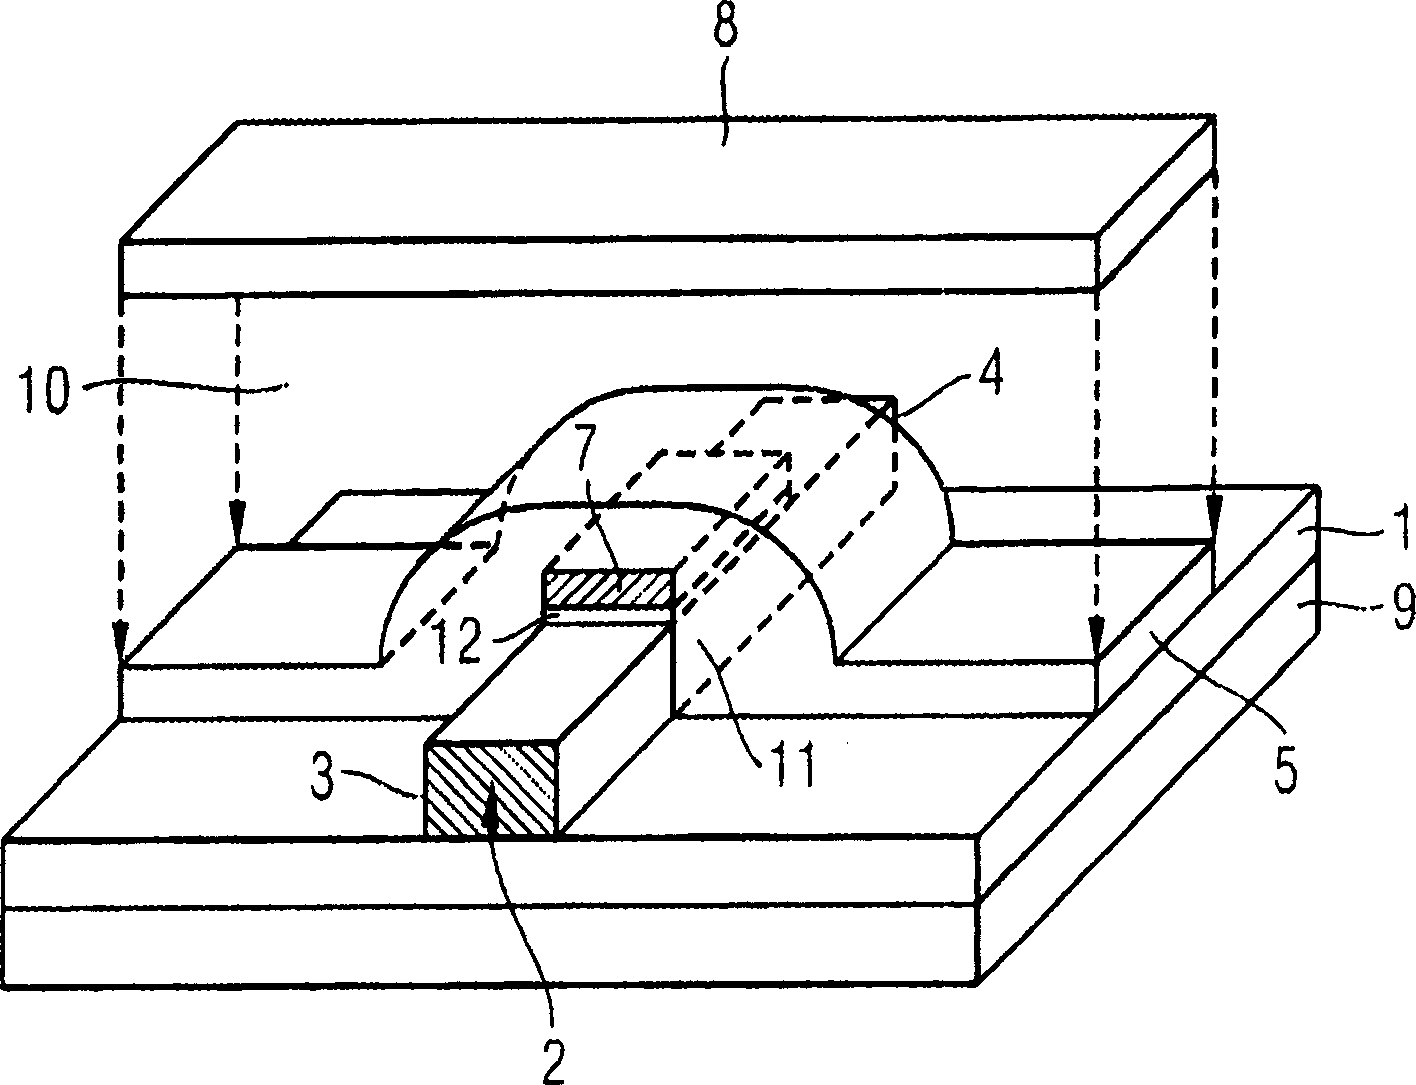 Double gate memory cell with improved tunnel oxide